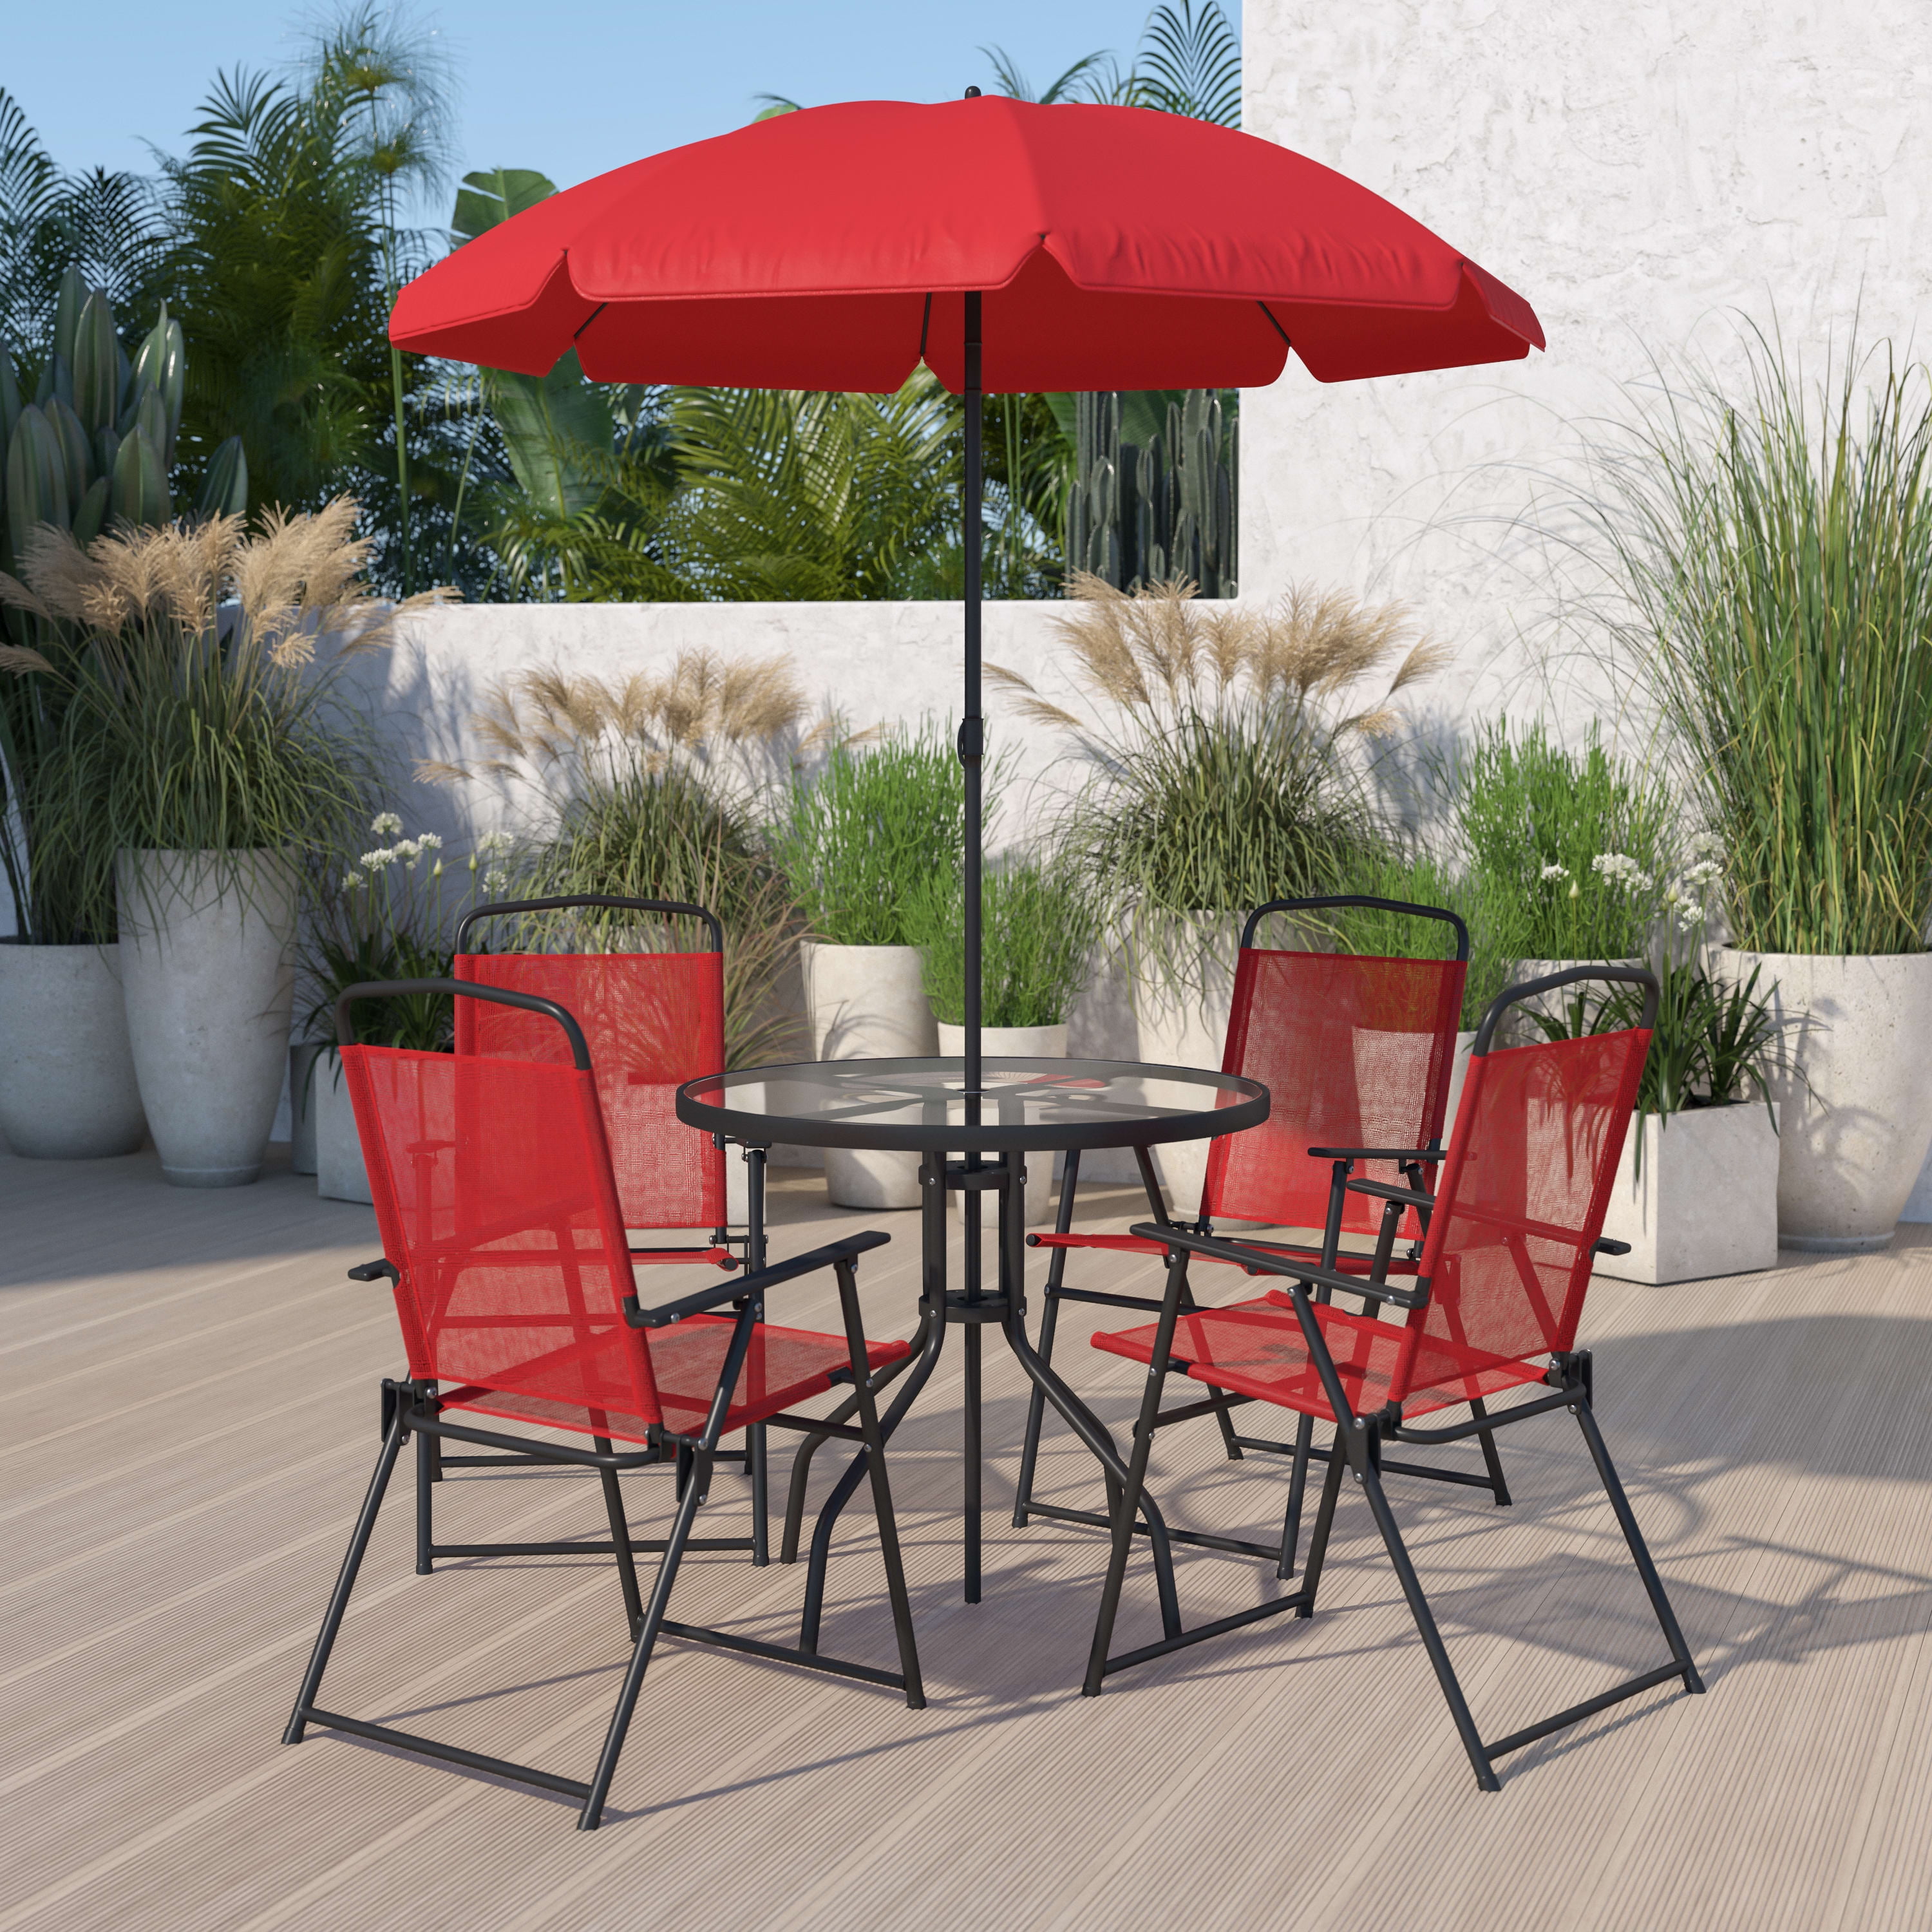 Quick Fold Sturdy Side Table Patio Portable Furniture Garden Yard Outdoor CR Red 